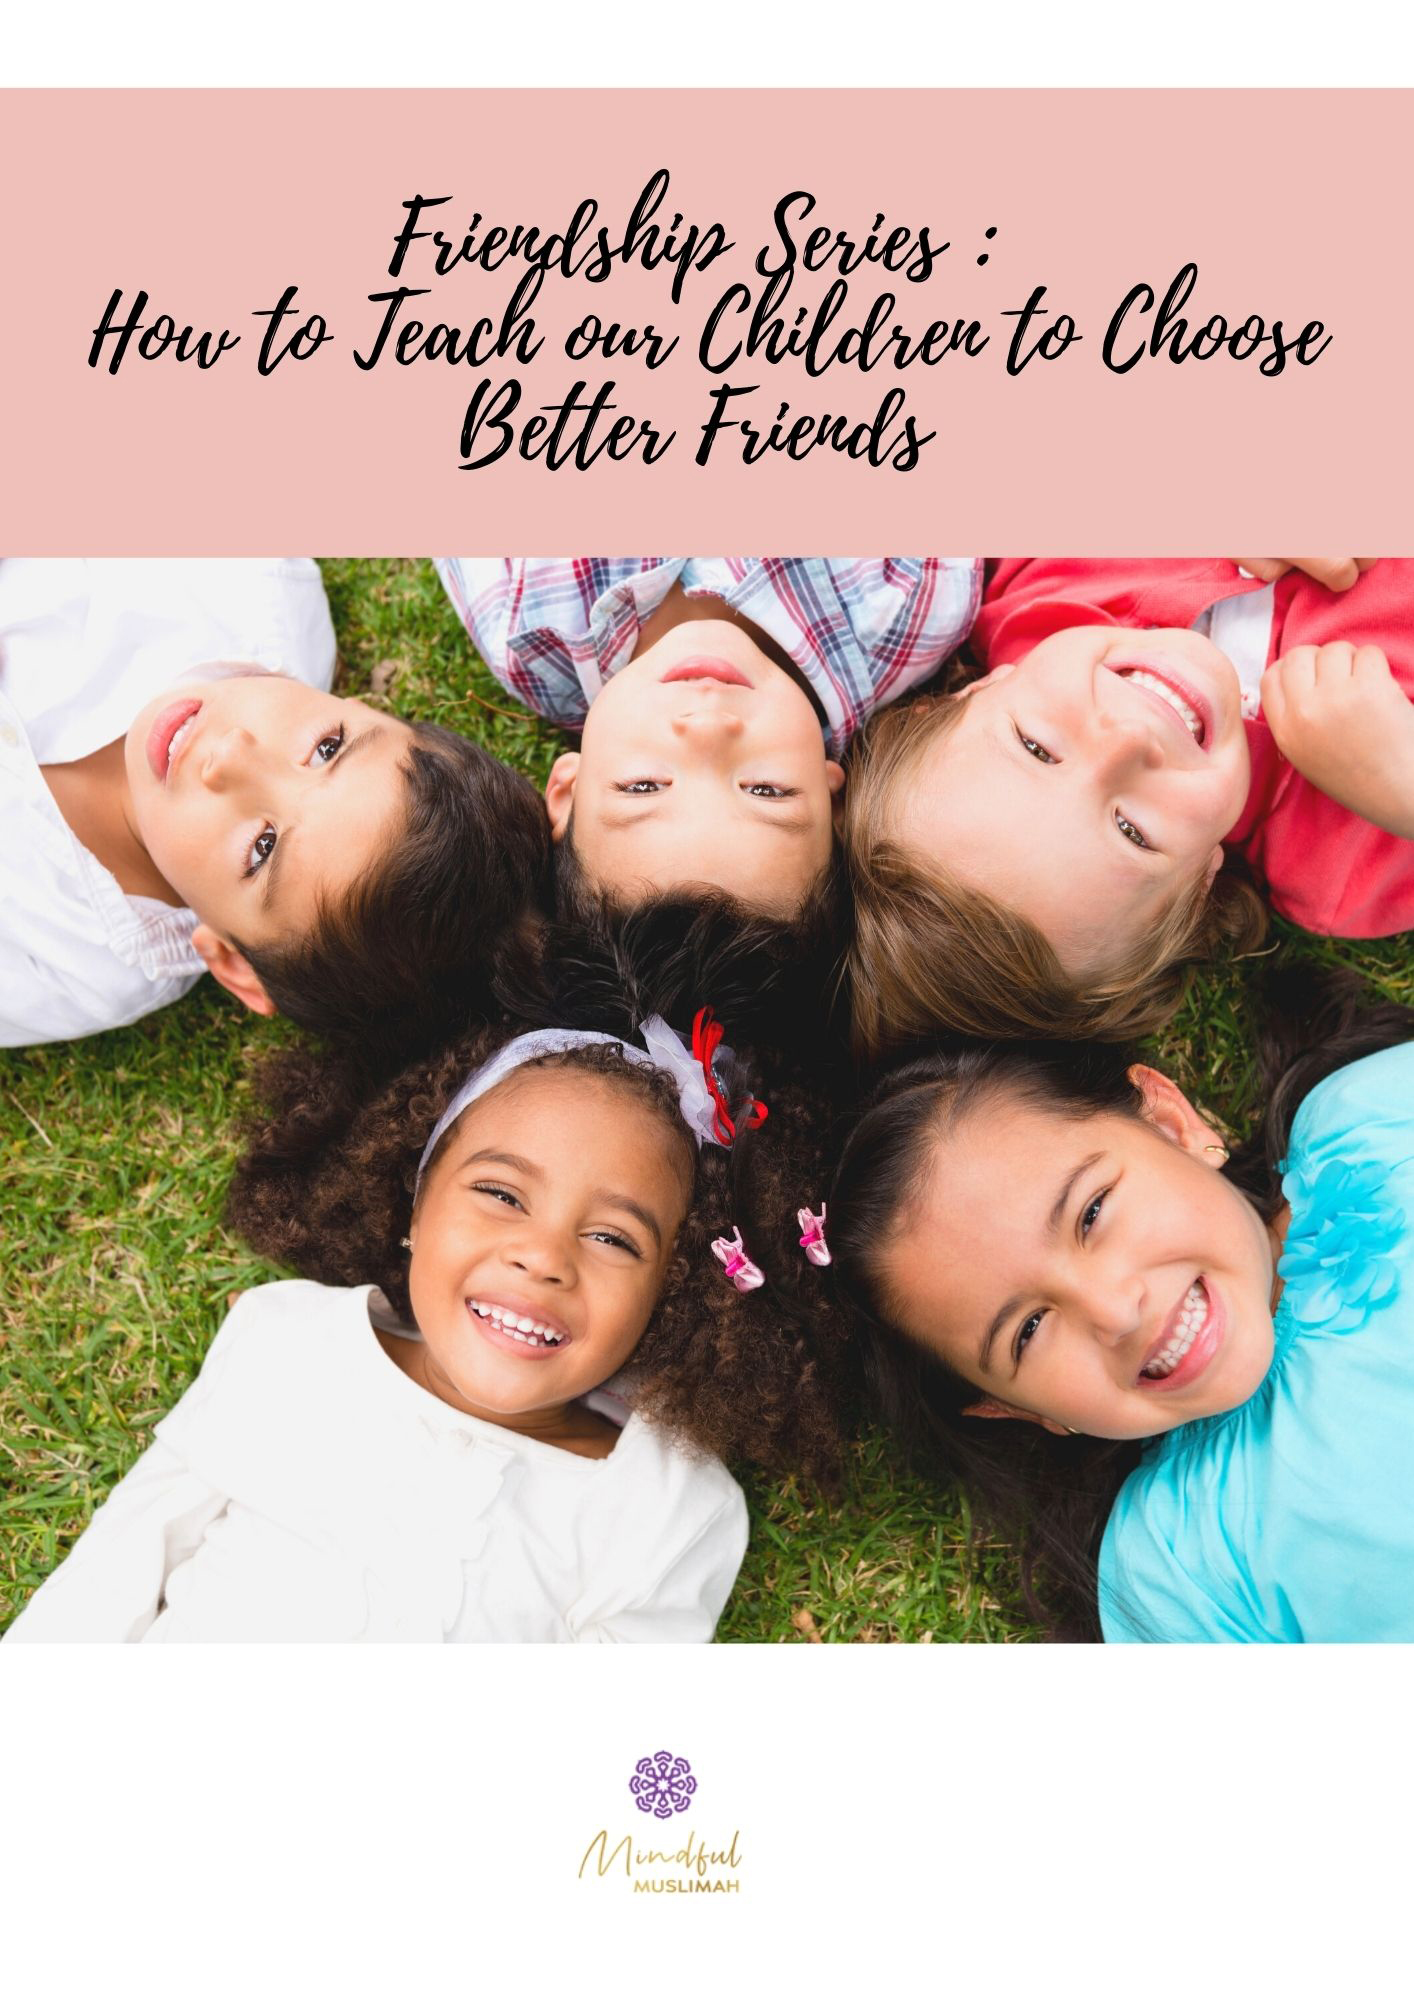 How to teach our children to choose better friends